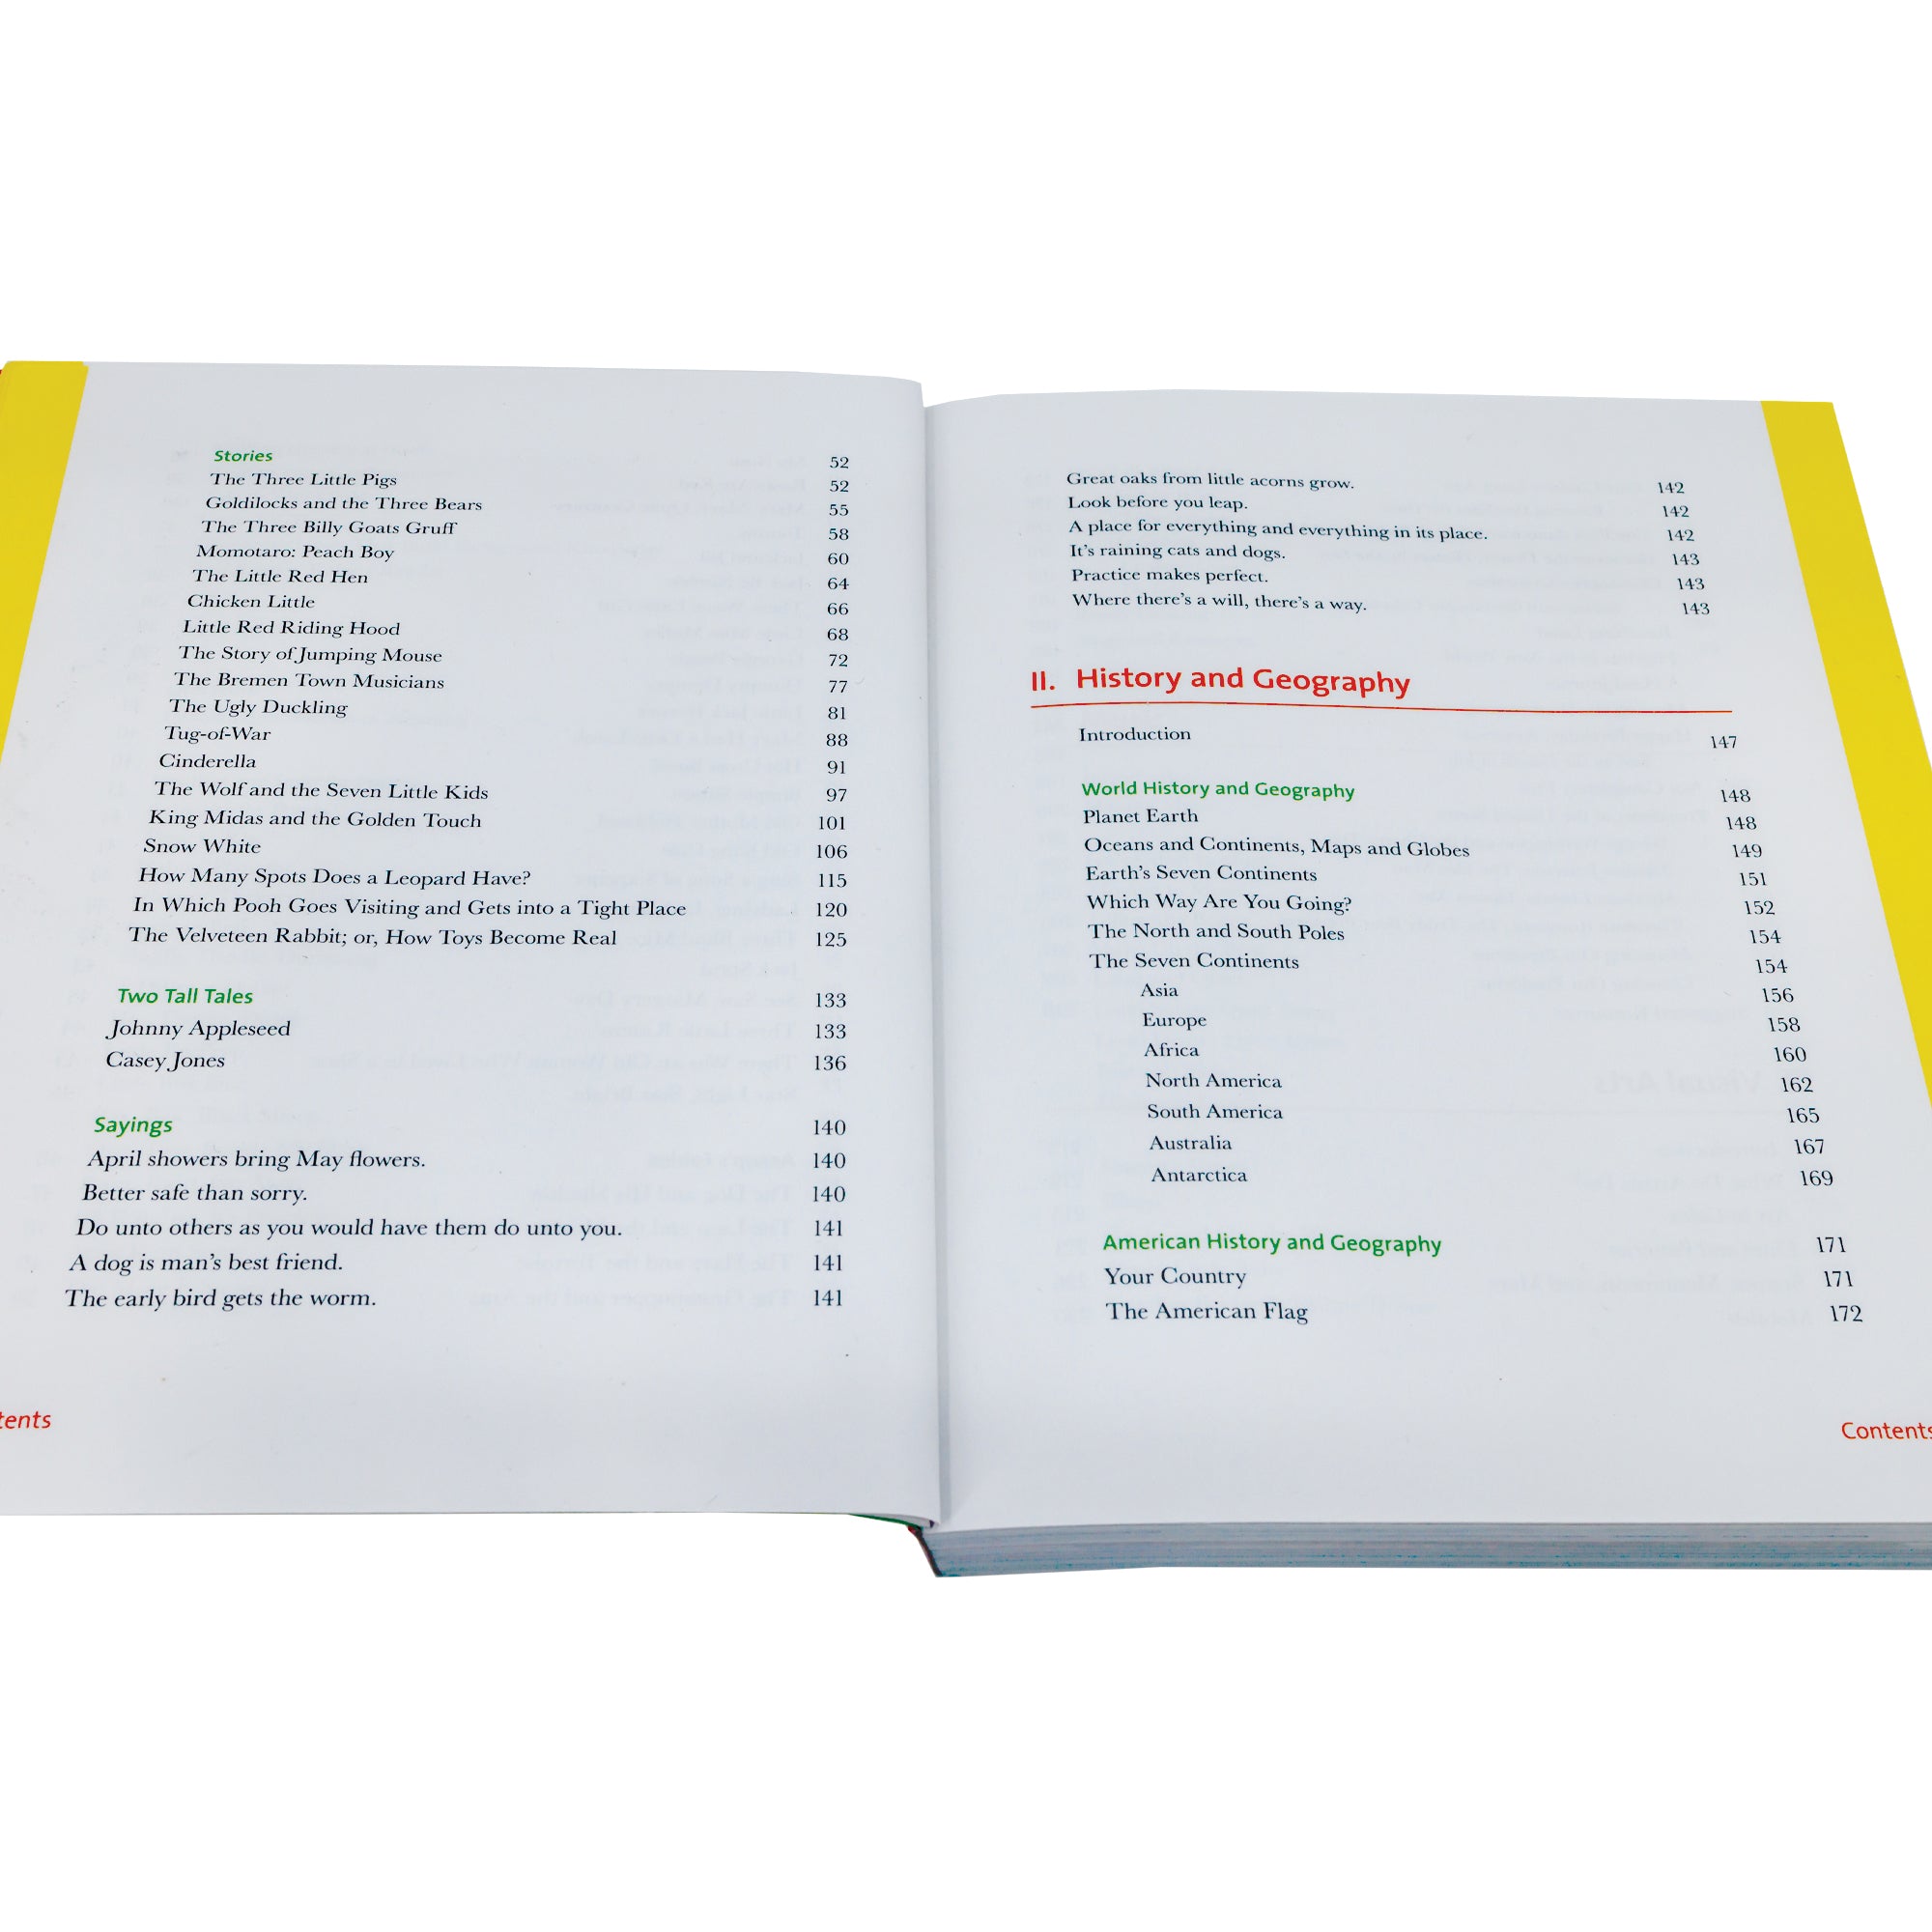 The What Your Kindergartener Needs to Know book open to show the contents on a white page with a yellow boarder along the outsides of the pages. The section titles are in red with green subsection titles and black text below. Section 2 is titled “History and Geography.”